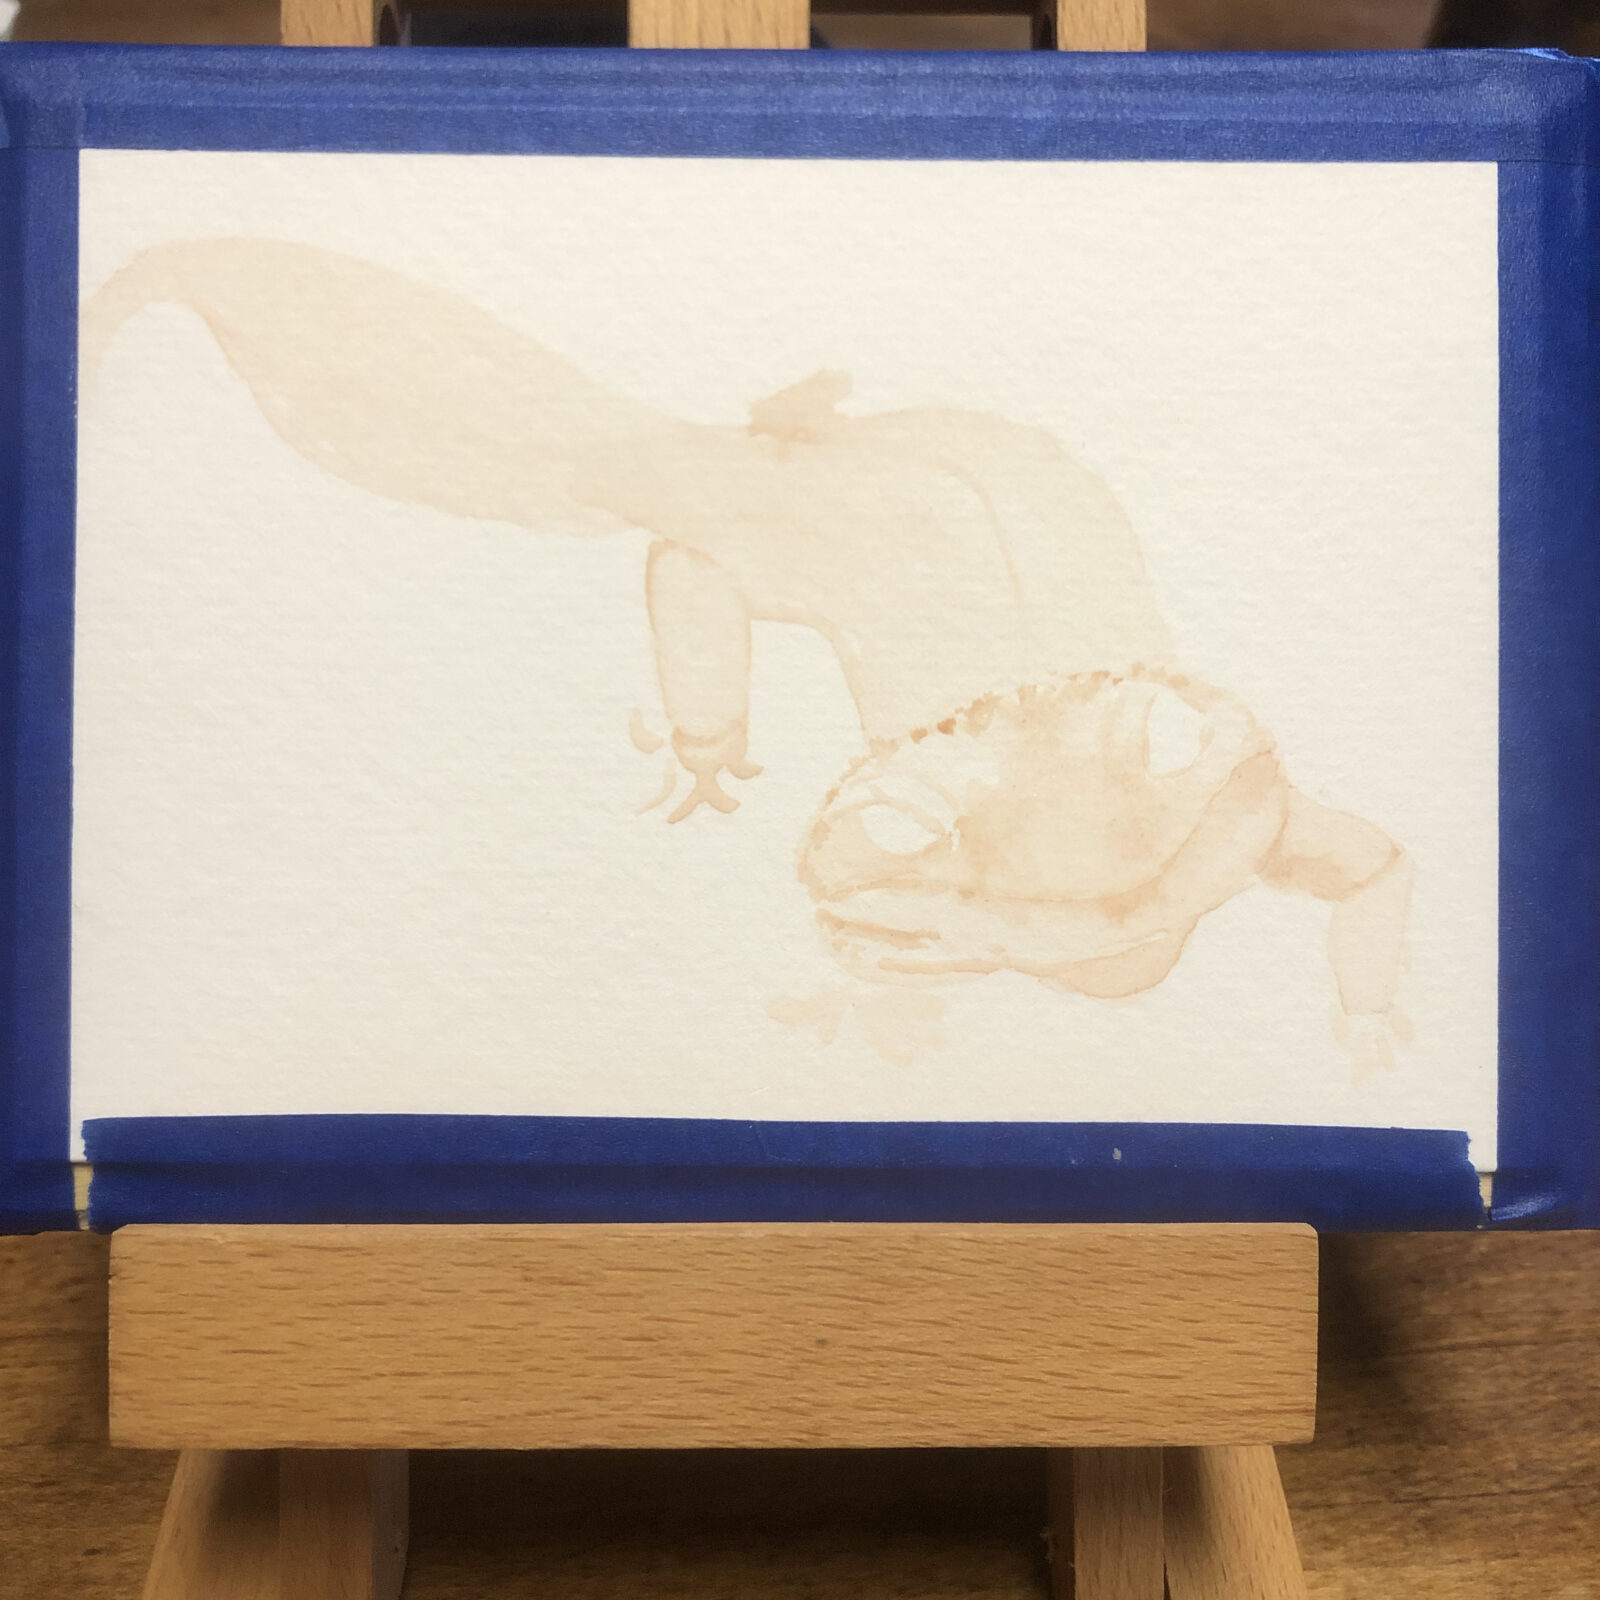 Just getting started on the first of the gecko paintings.